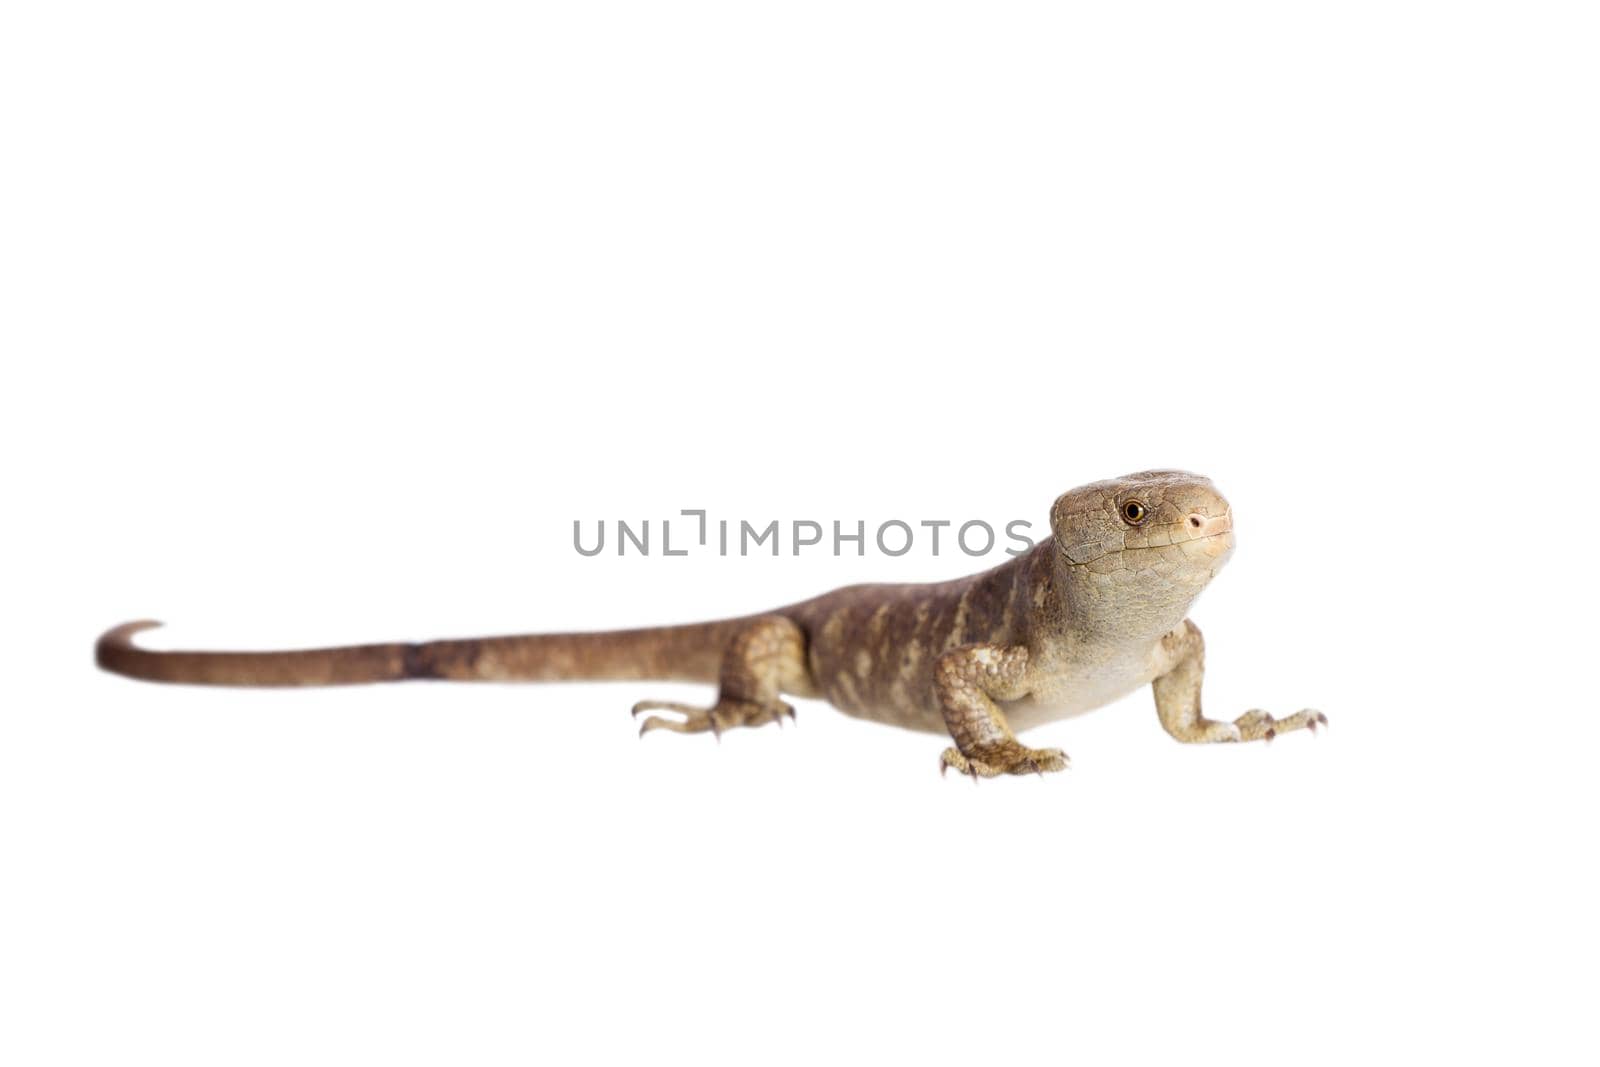 The Solomon Islands skink on white by RosaJay